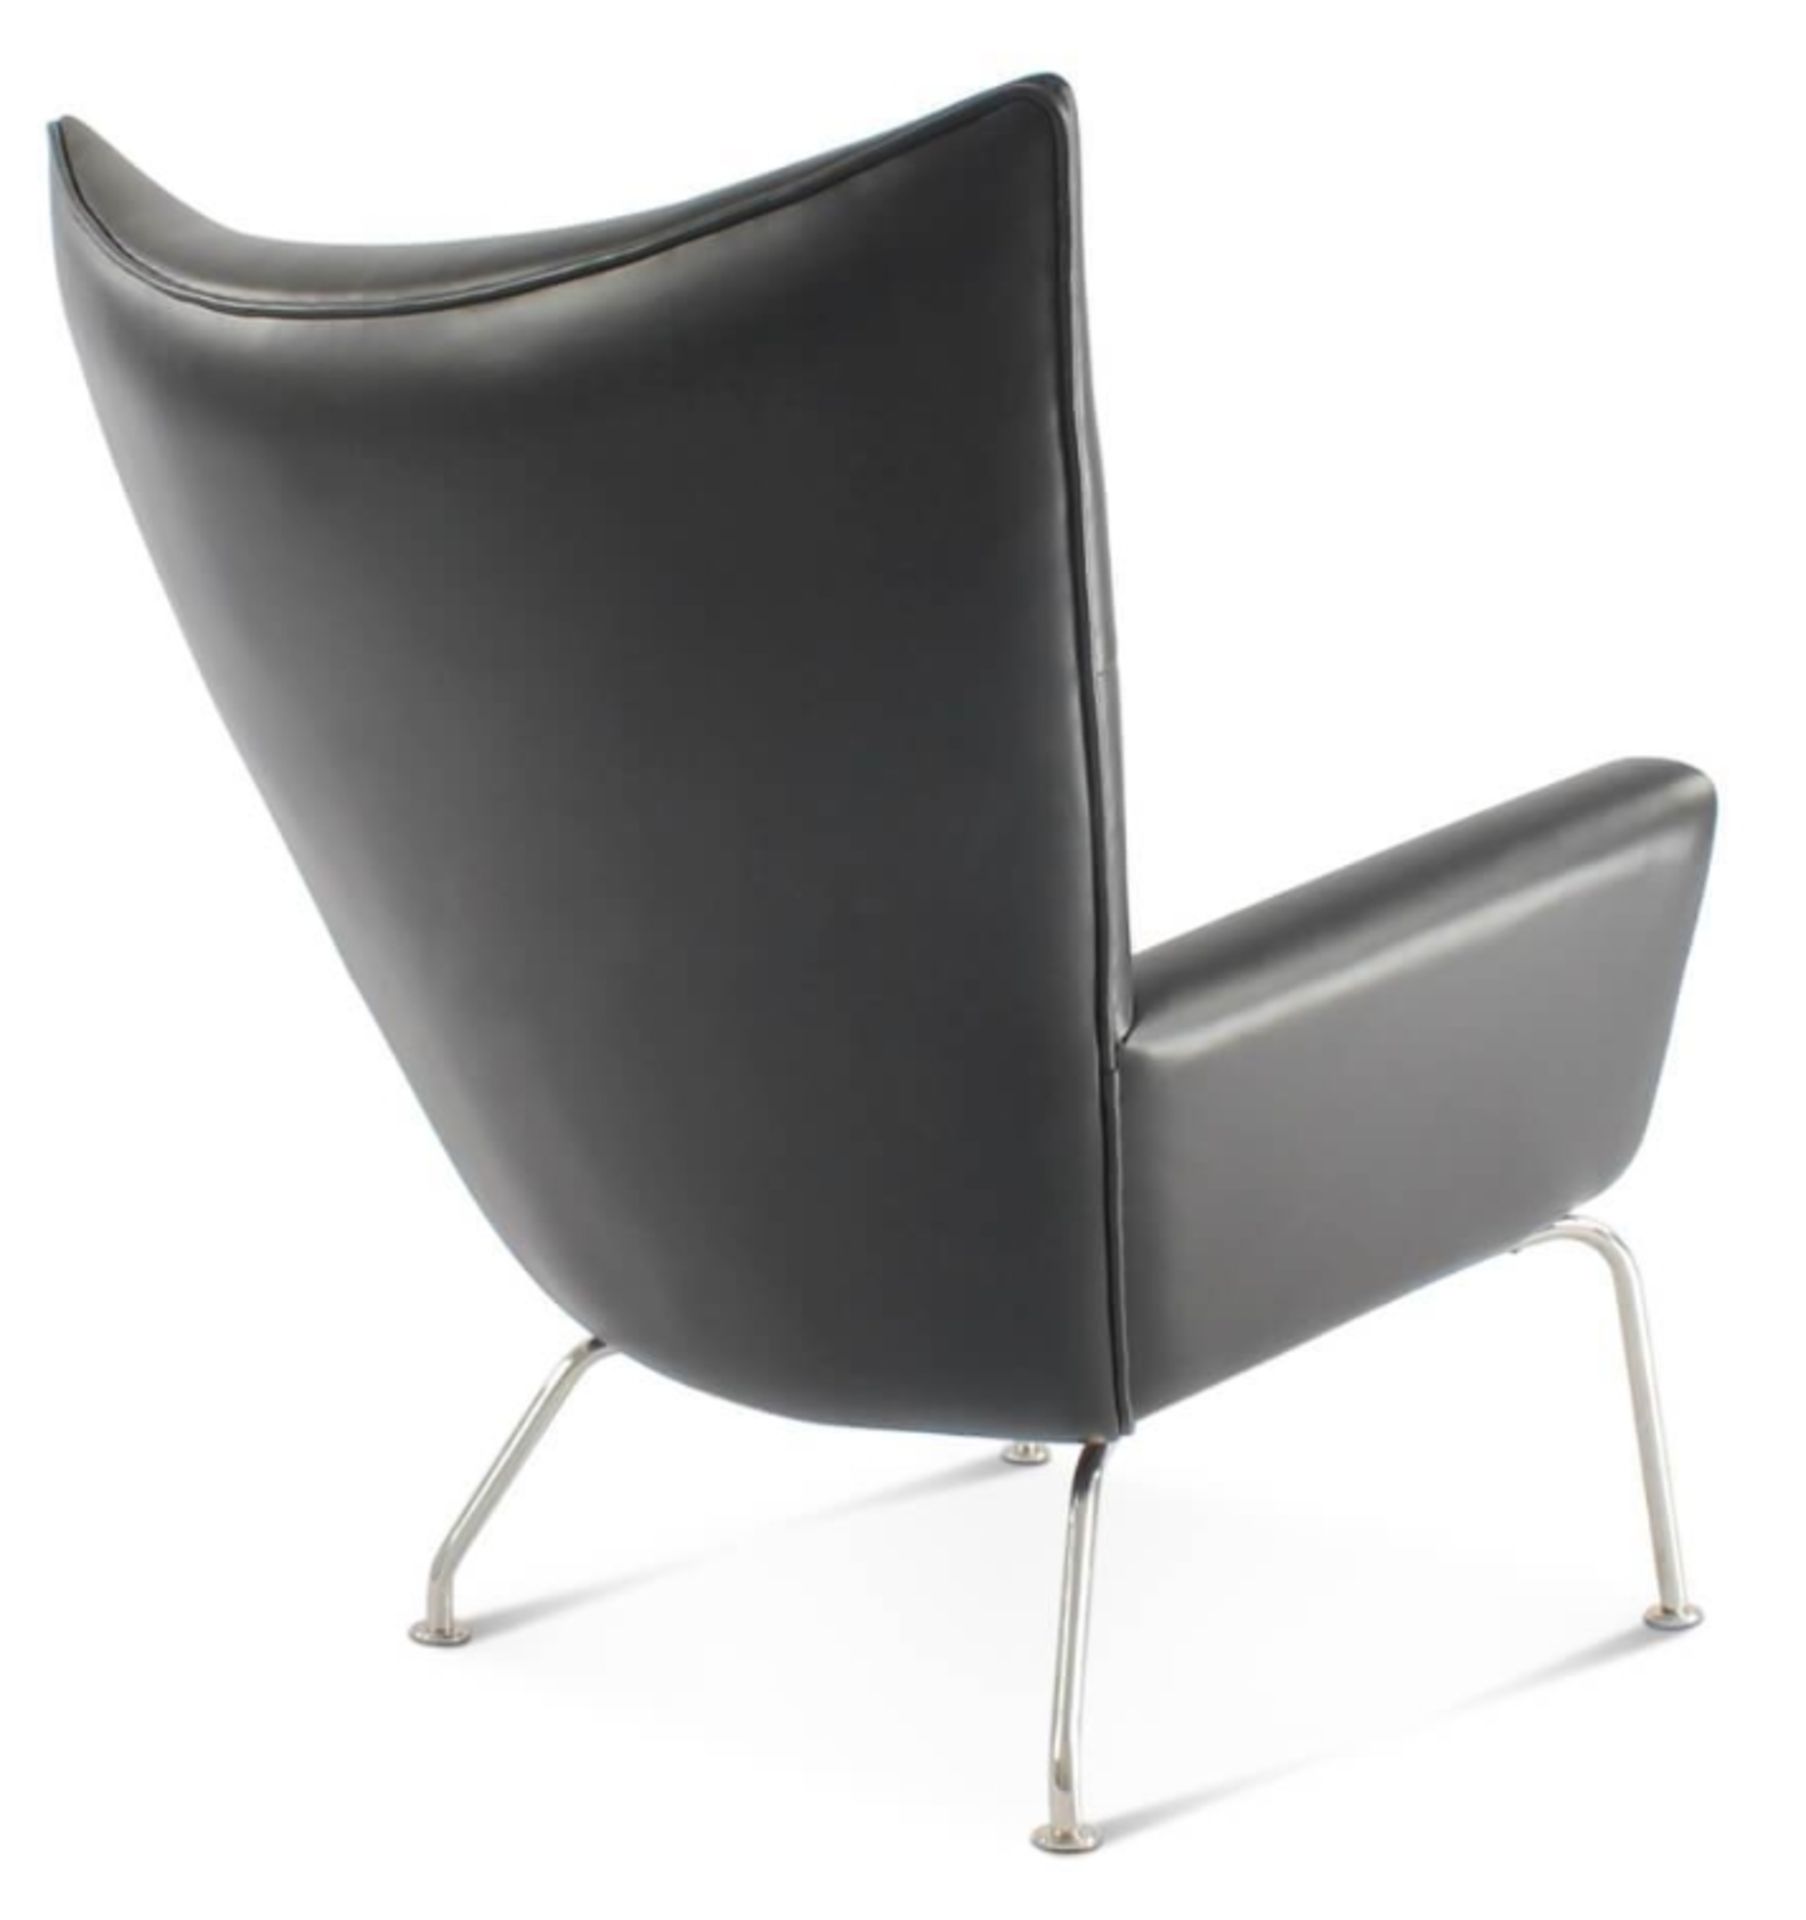 1 x Hans Wegner Inspired Wing Arm Chair - Genuine Black Leather Upholstery - Image 8 of 11